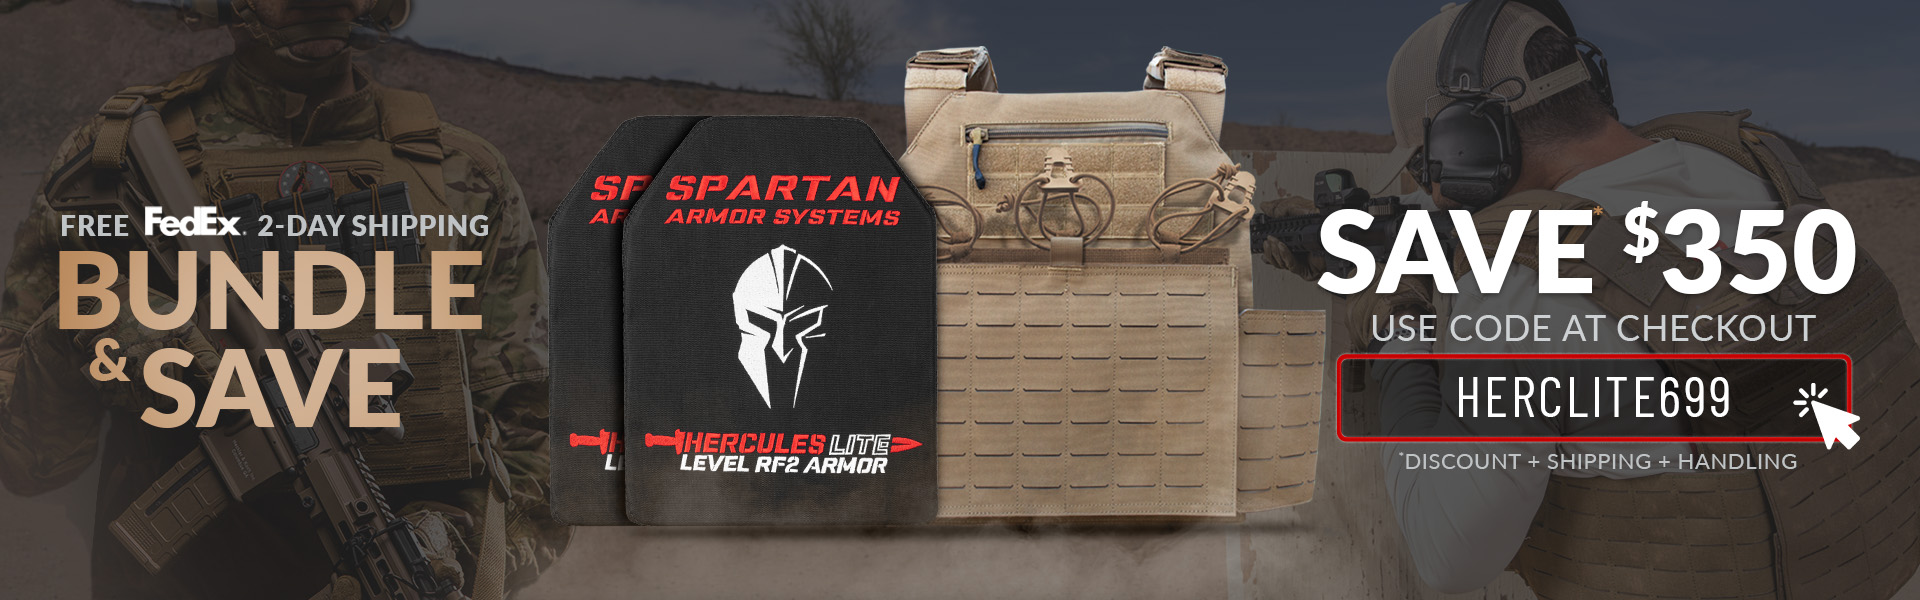 Save $350 Today on Level III+ Lightweight protection